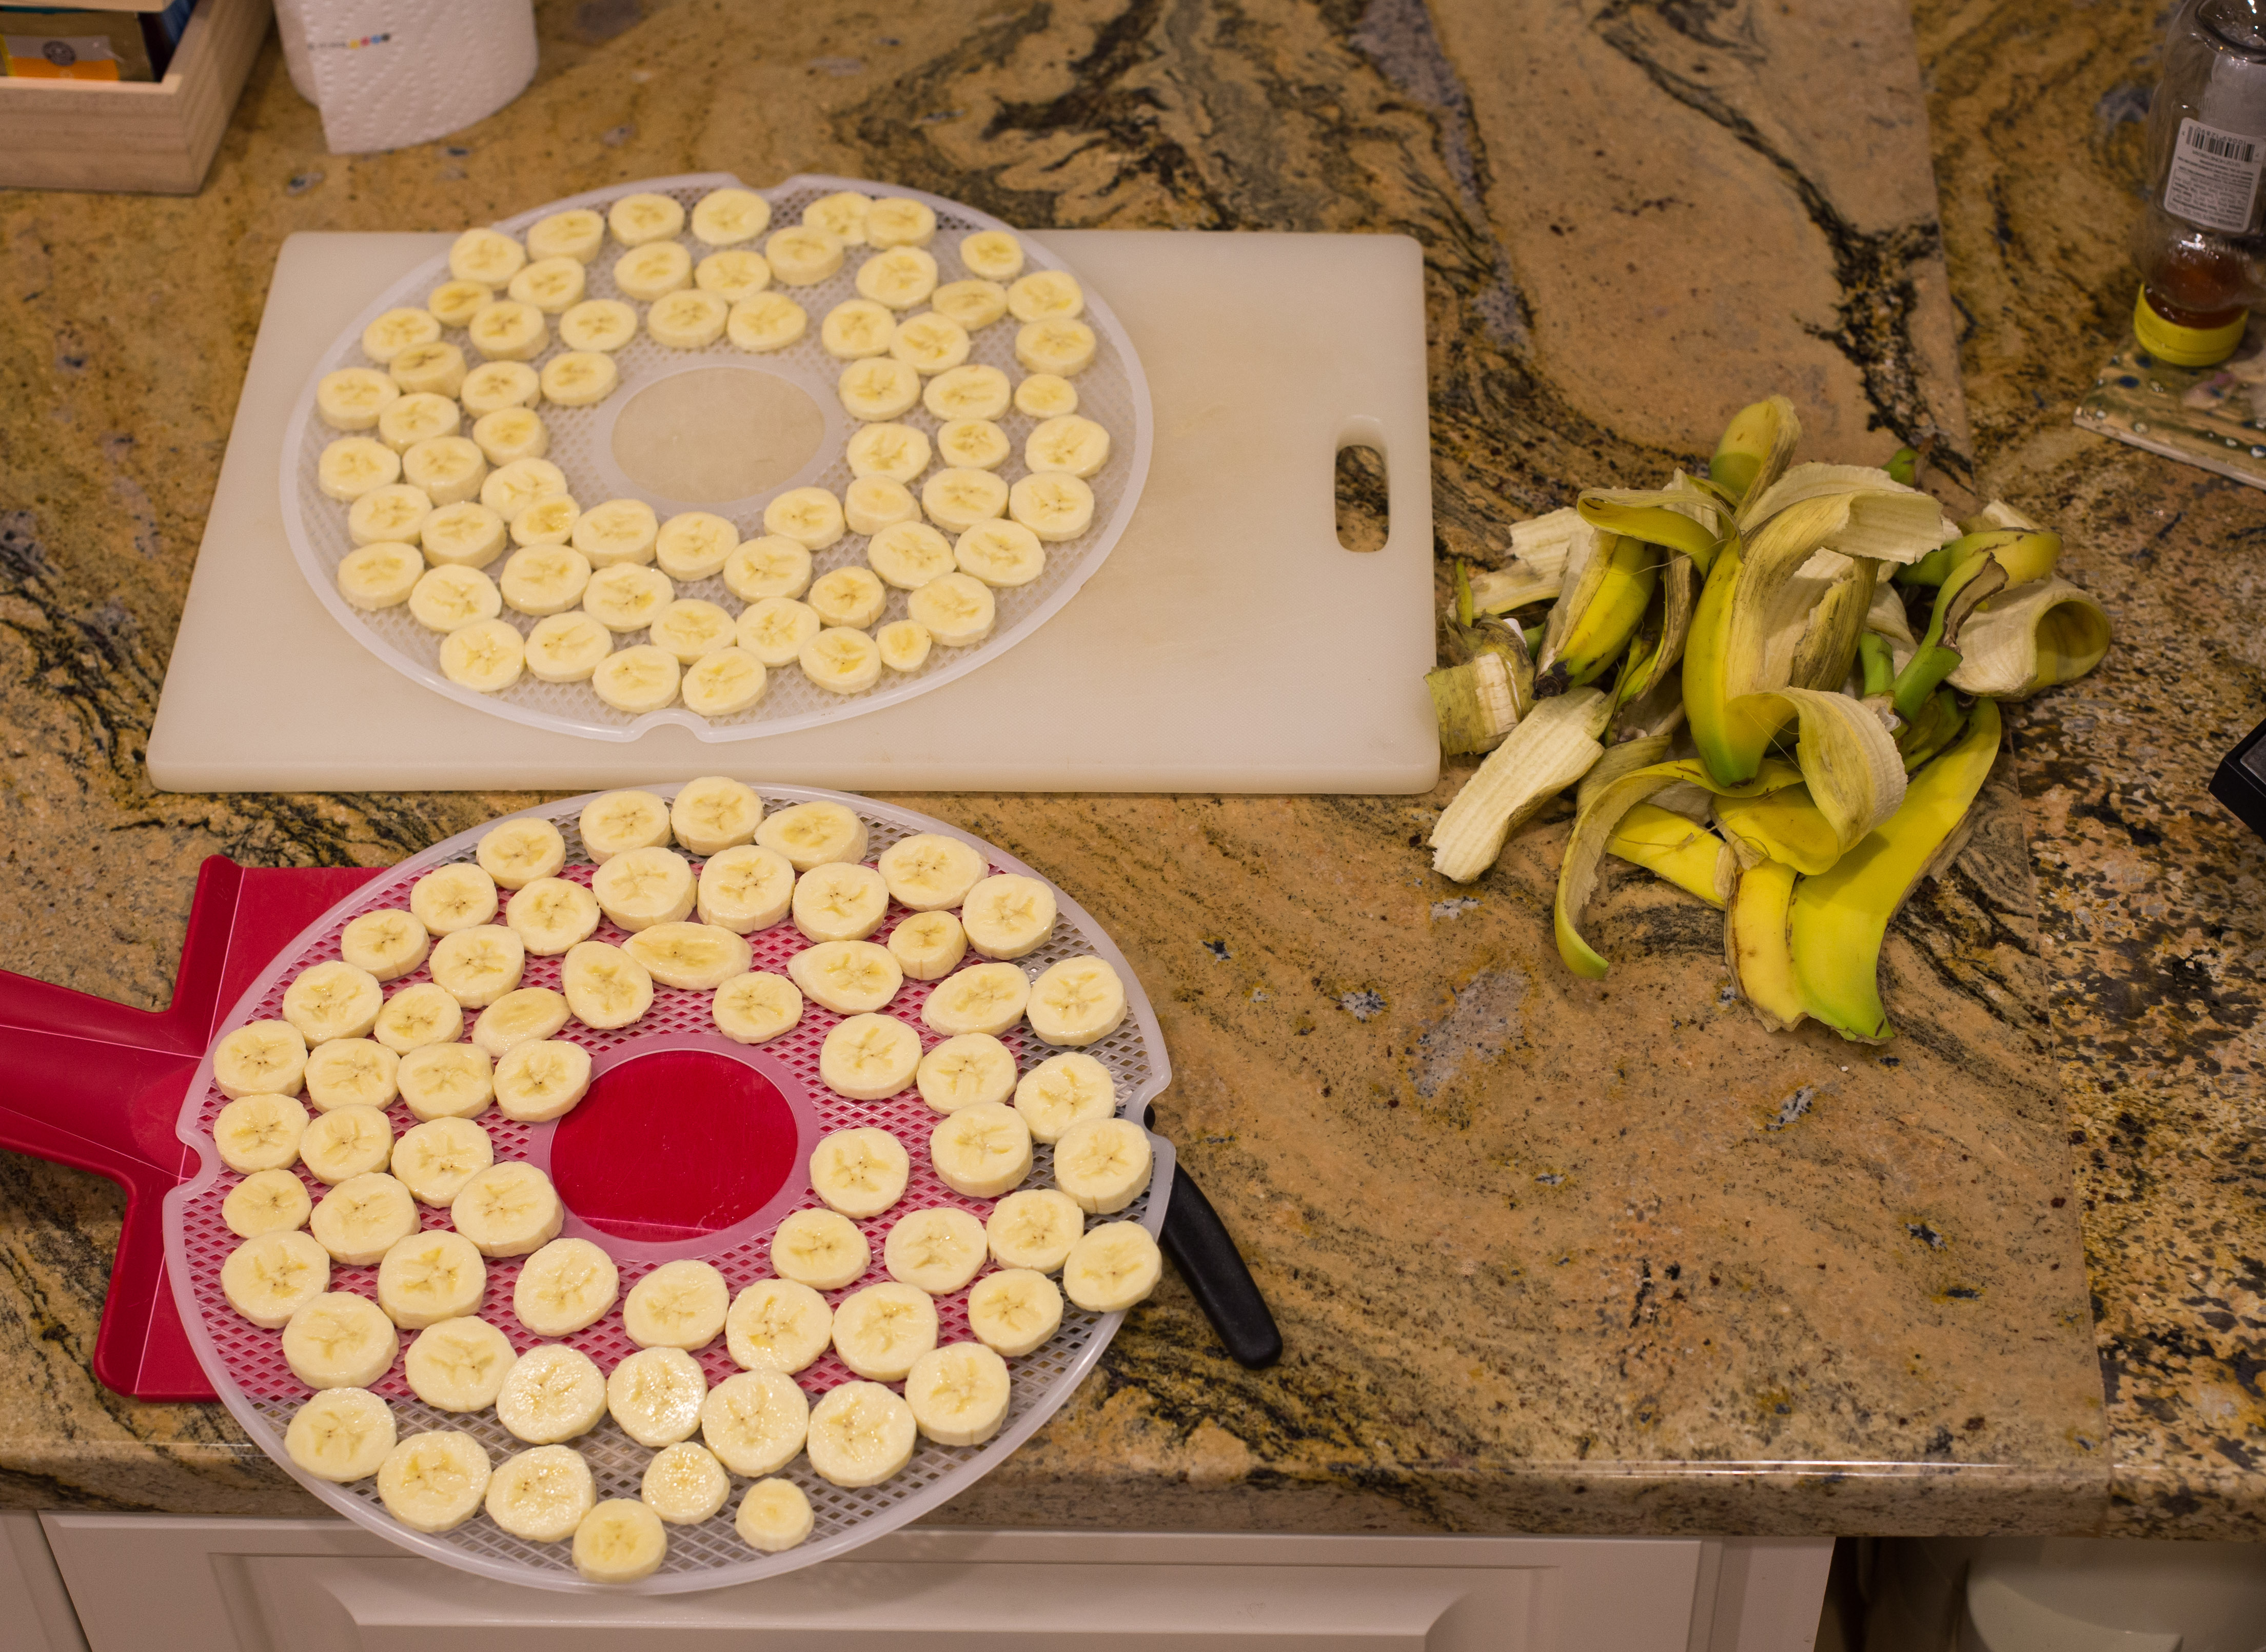 Bananas sliced and ready for the dehydrator